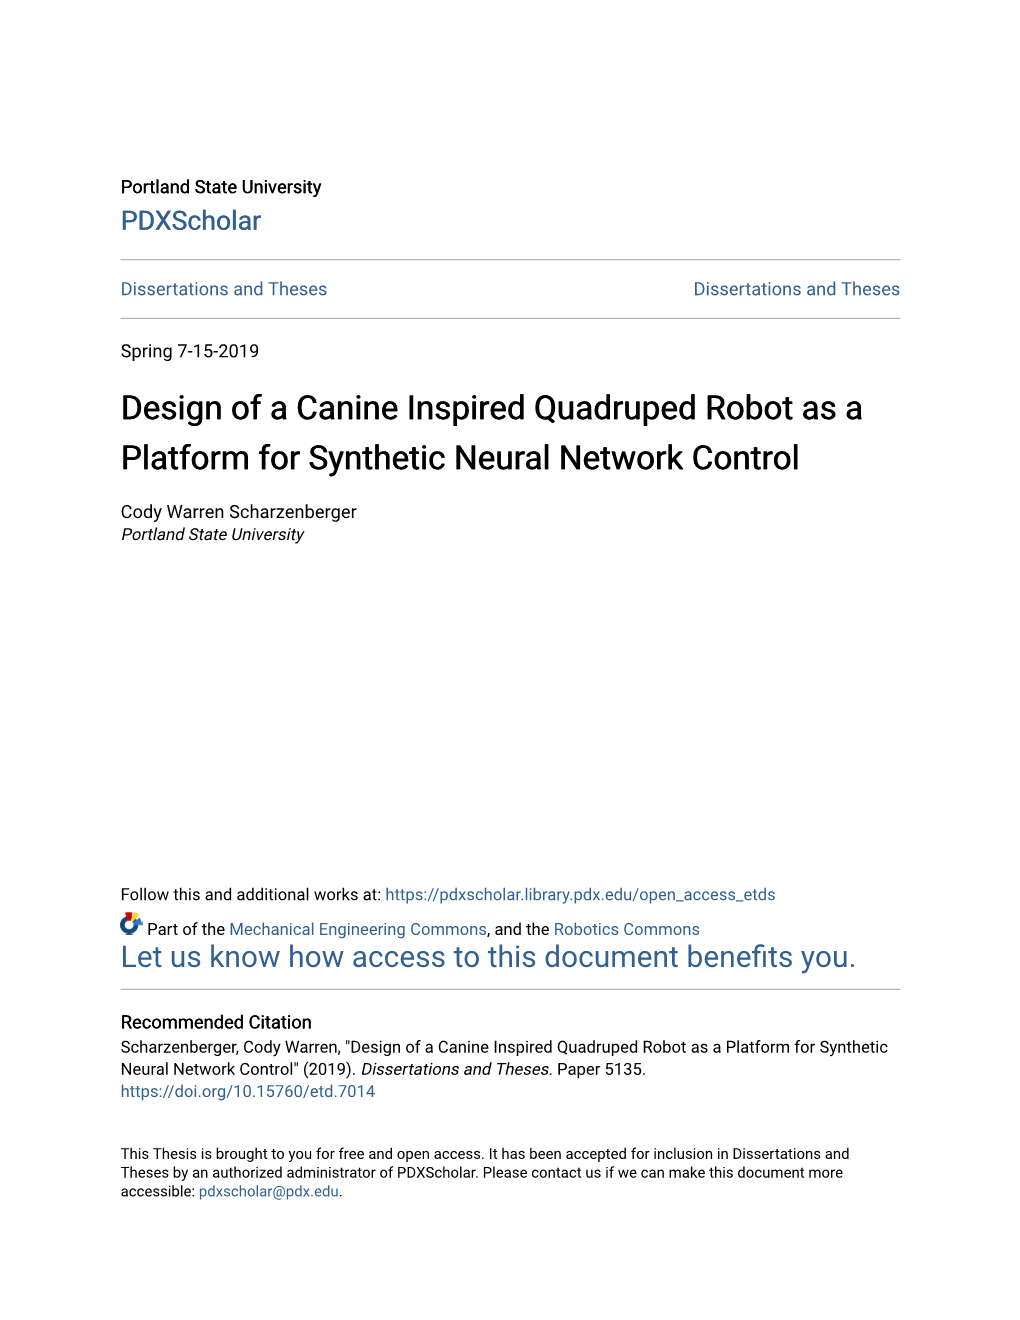 Design of a Canine Inspired Quadruped Robot As a Platform for Synthetic Neural Network Control